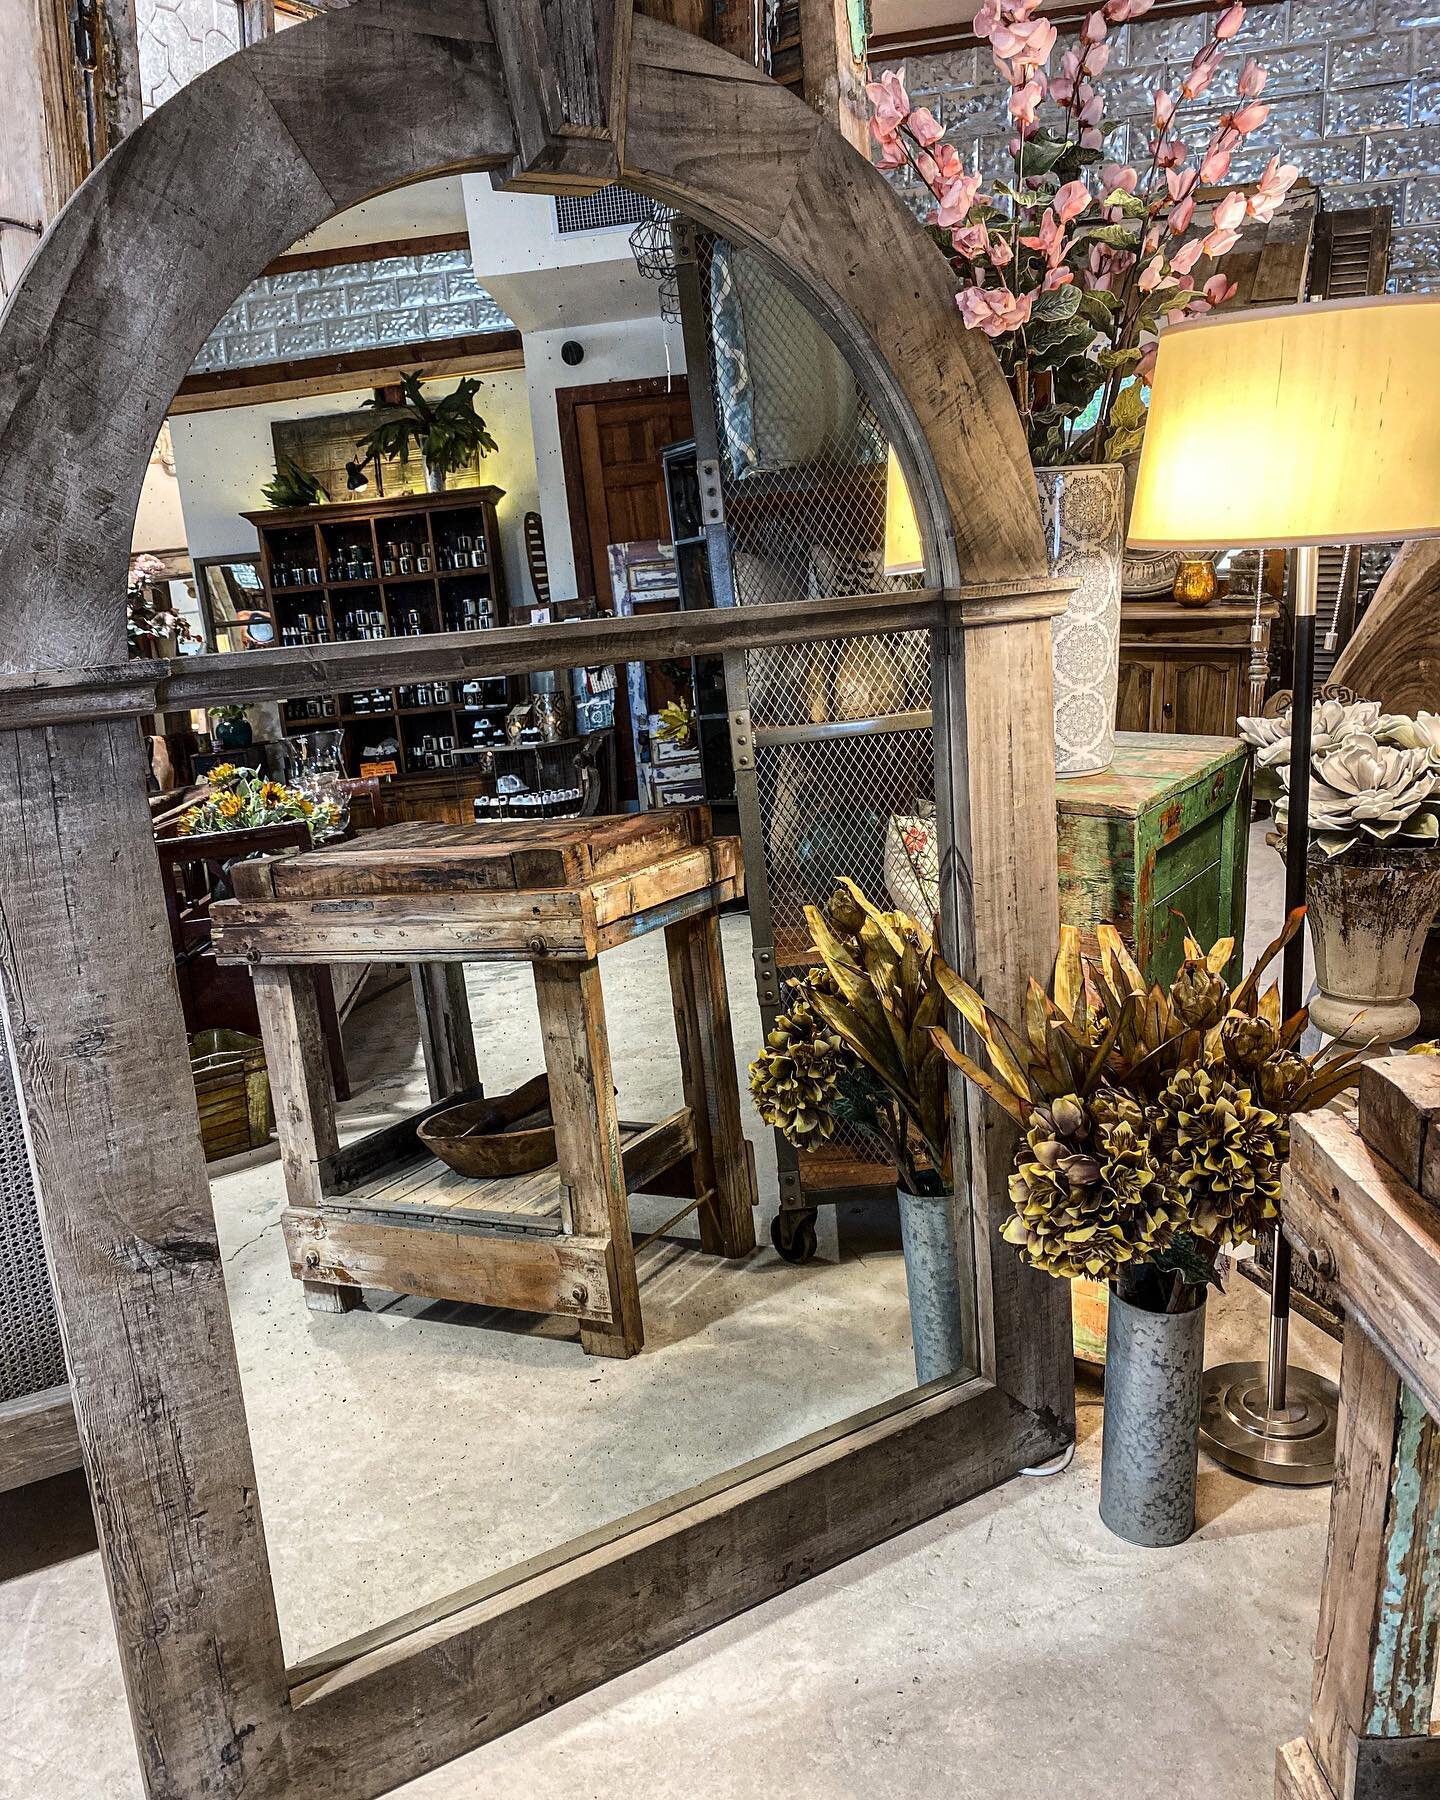 This grand mirror measures approximately 75&rdquo; x53&rdquo;. 

We&rsquo;re open Mon-Fri 10-5, Sat 10-6, Sun 12-3. We are located at 1499 S. Main St., next to the Dog &amp; Pony Grill.

#boerne #boernetexas #boernetx #boerneshopping #shopboerne #vis